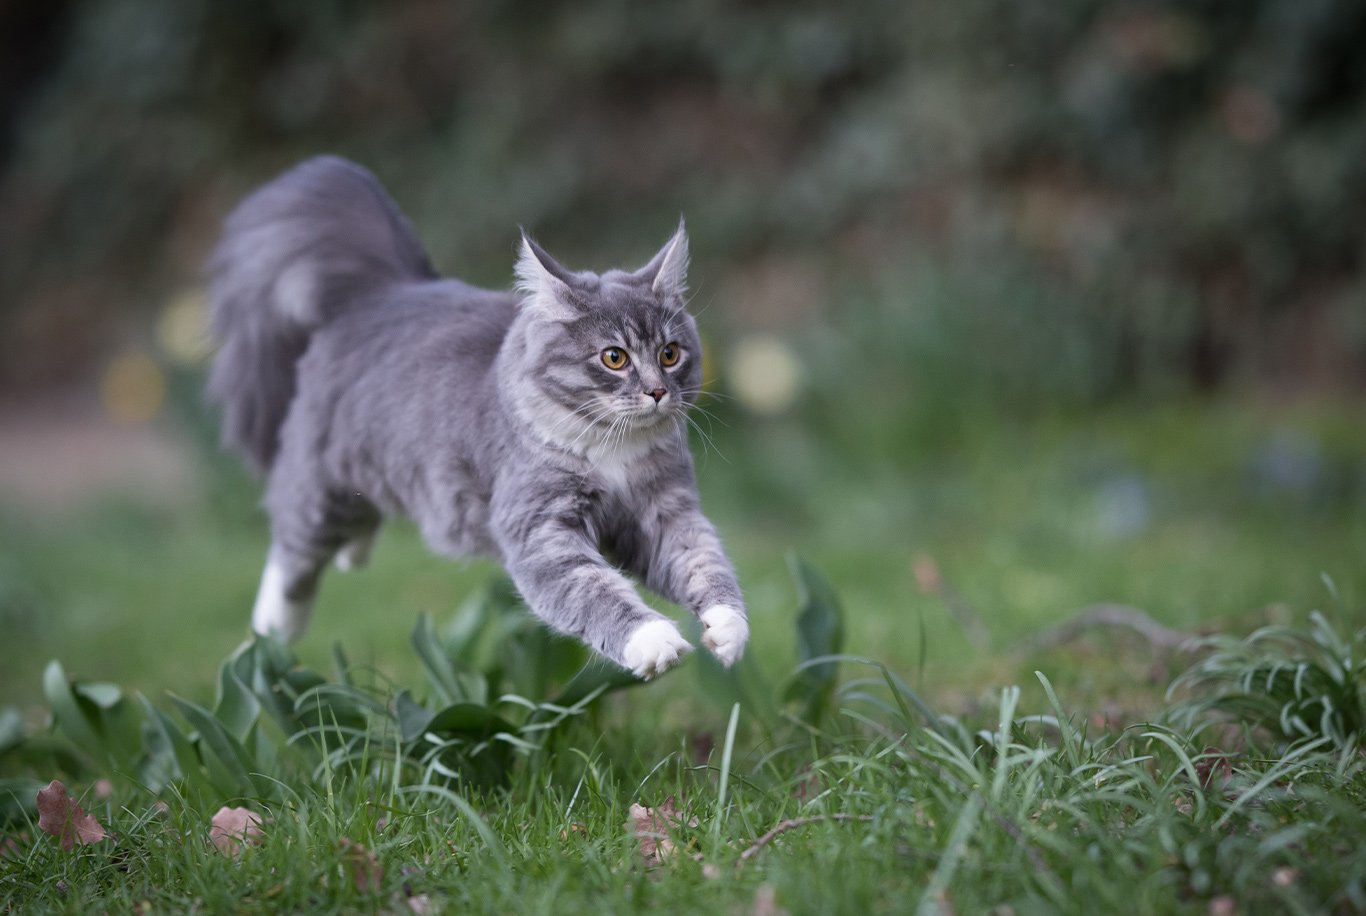 V. Tips for Keeping Maine Coon Cats Active and Engaged